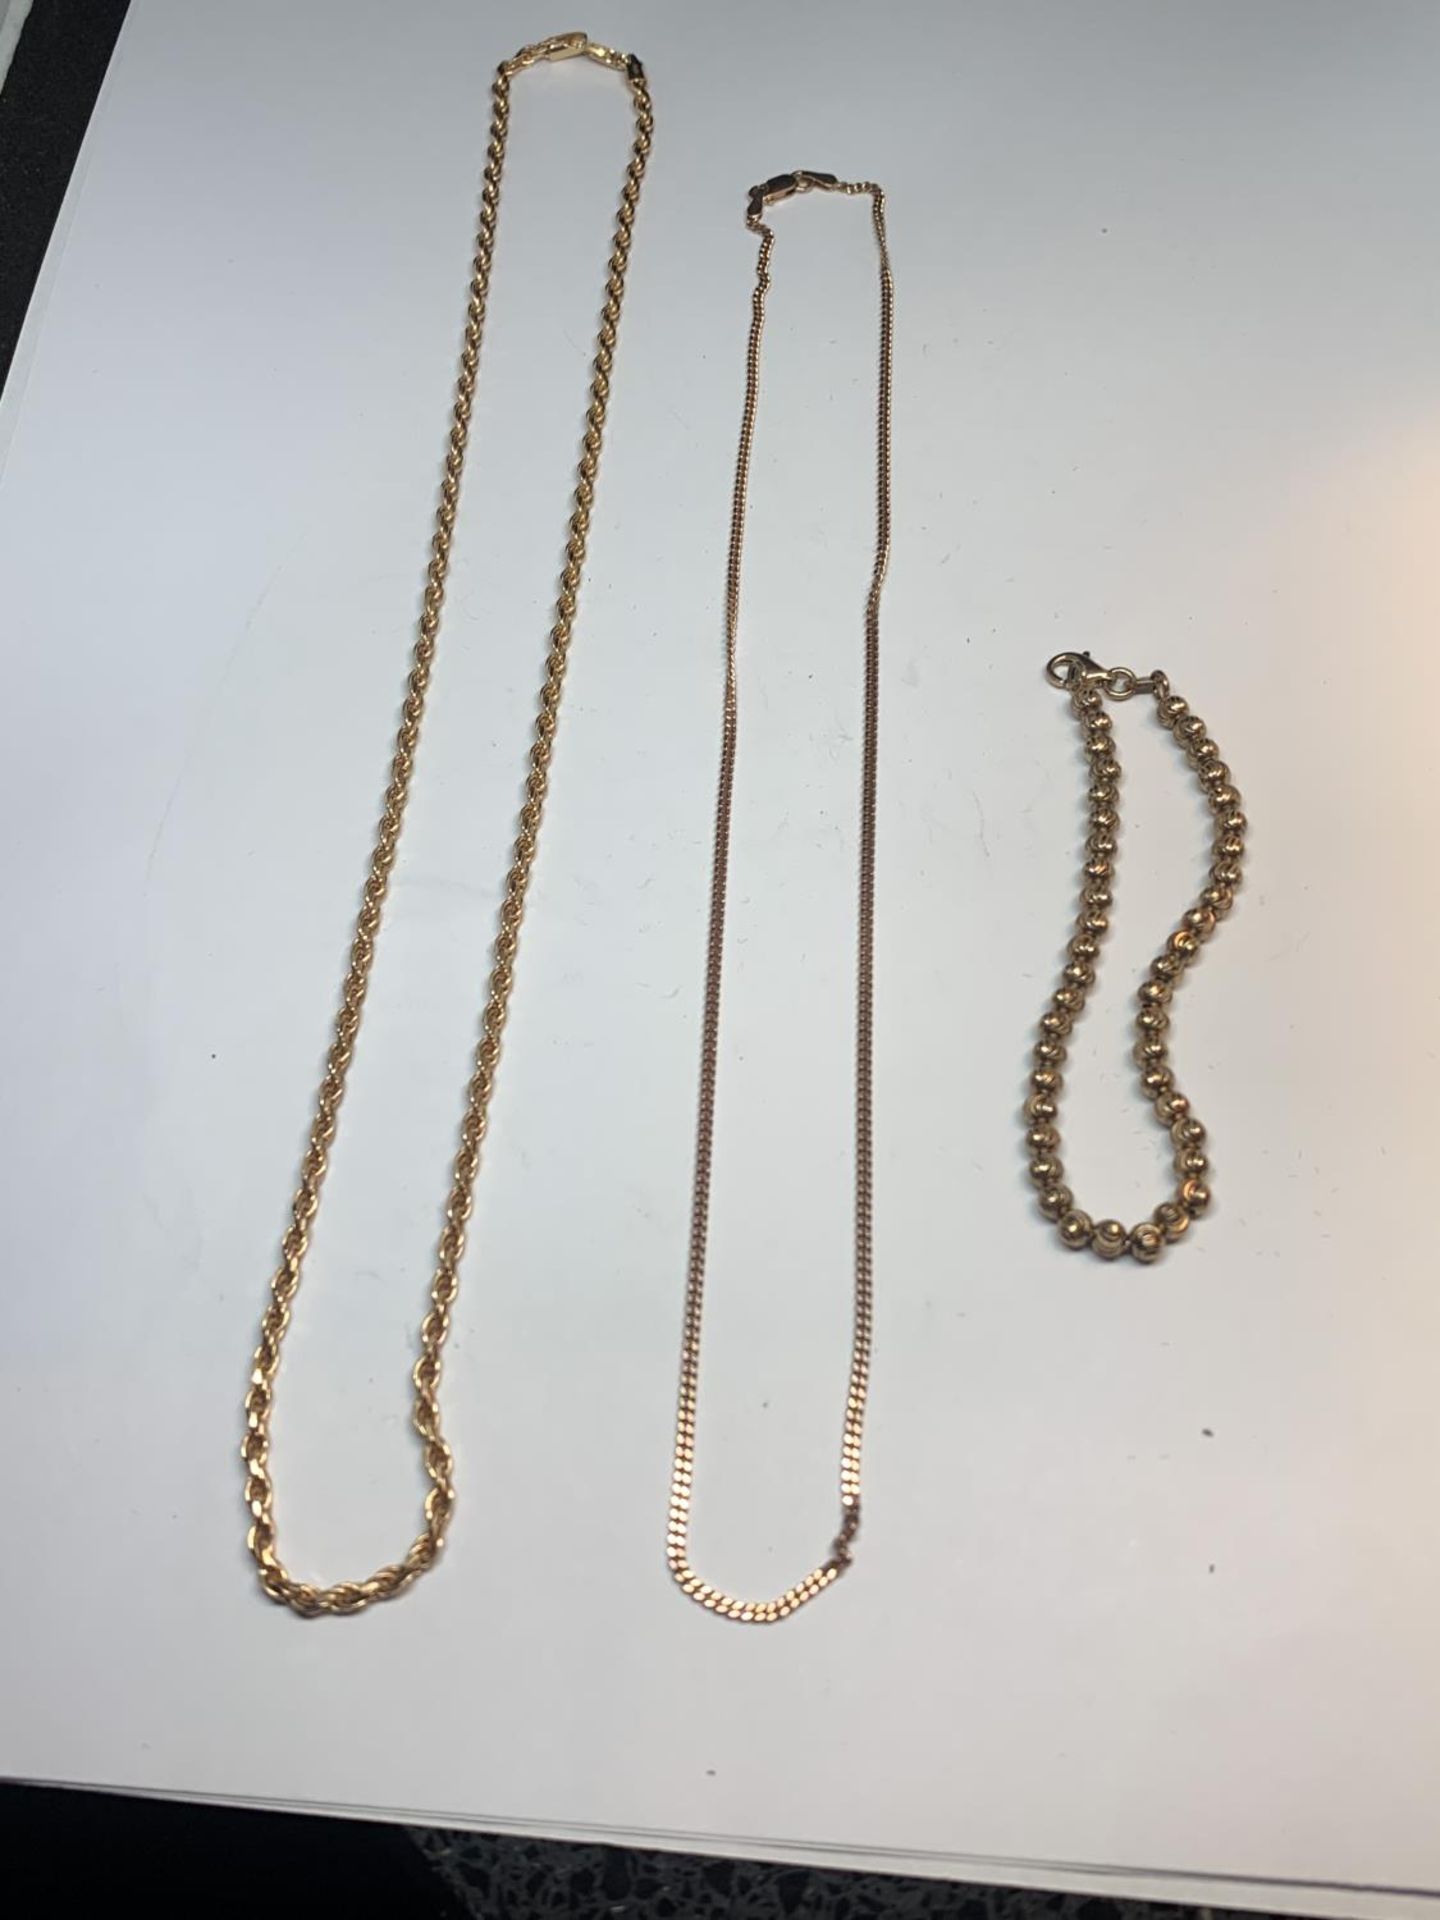 THREE ITEMS OF SILVER GILT JEWELLERY TO INCLUDE A BRACELET AND TWO NECKLACES